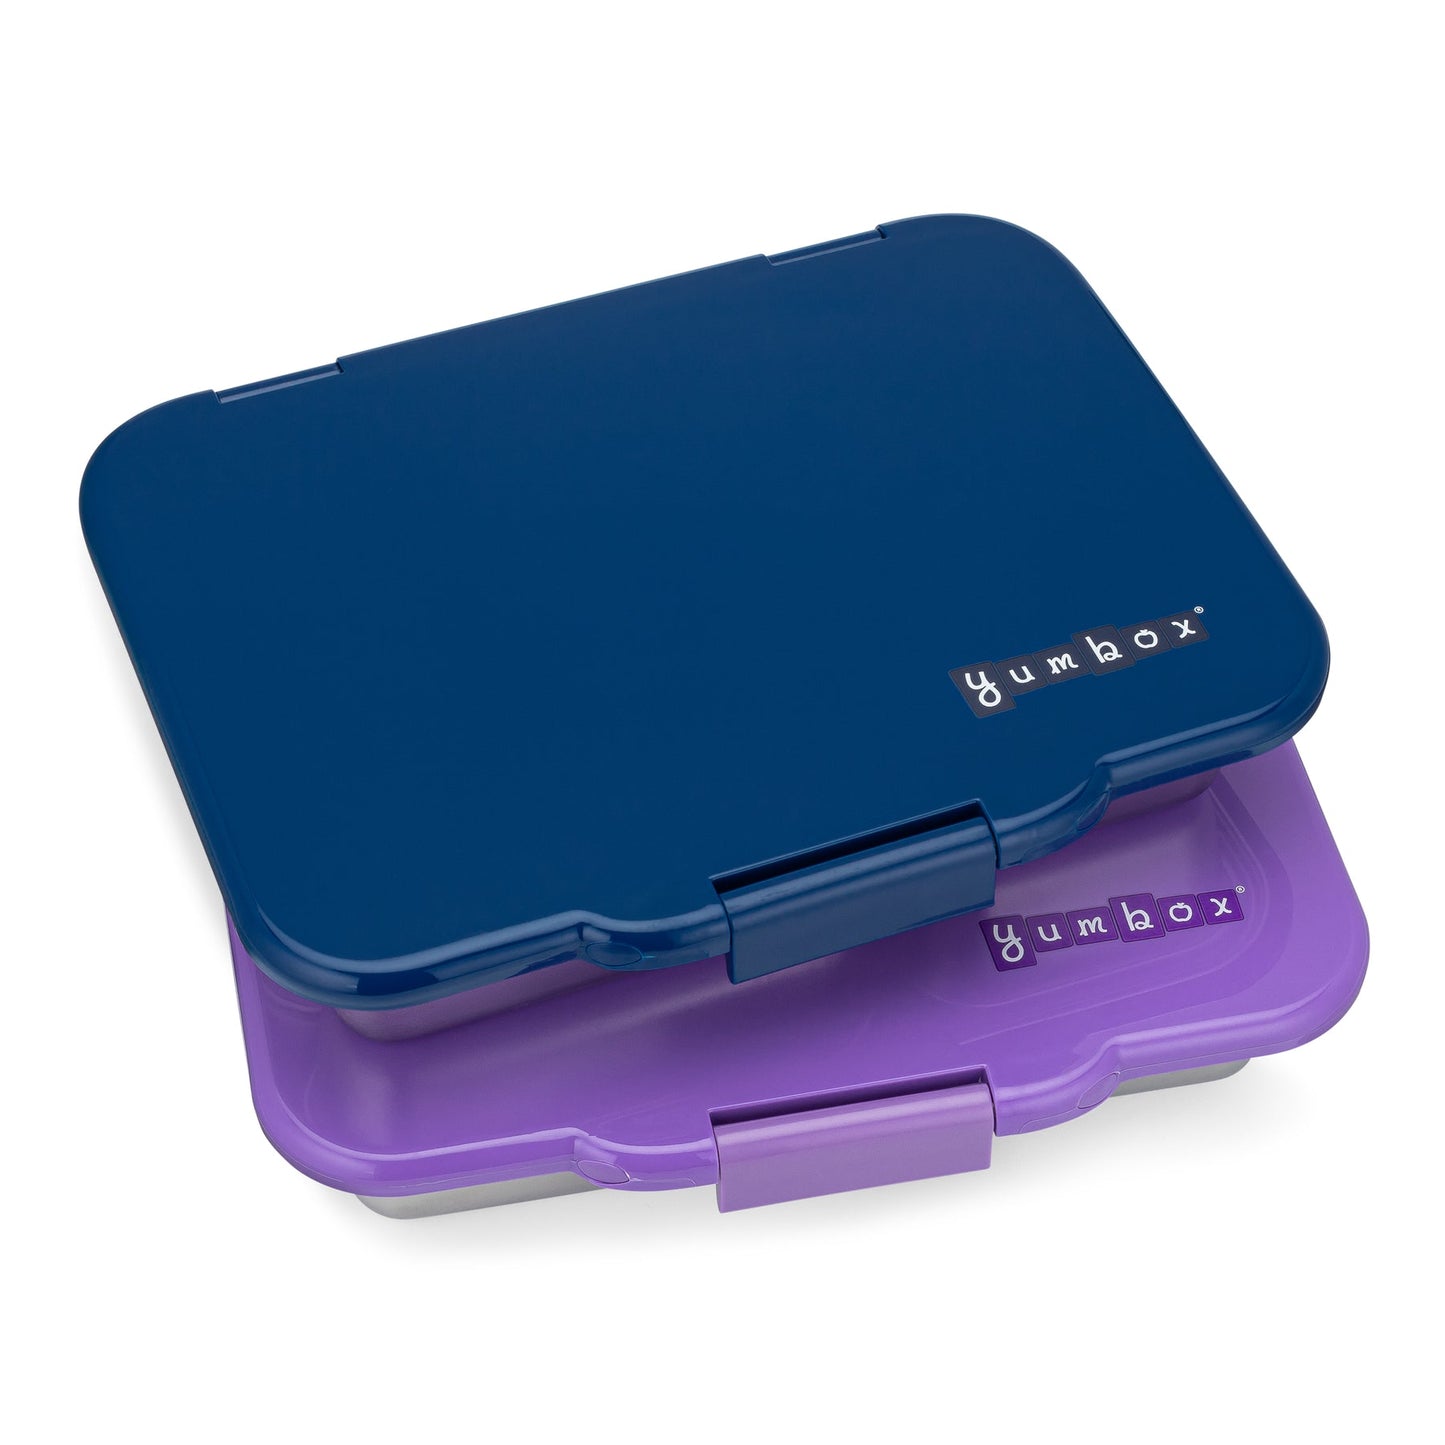 Yumbox Presto | Santa Fe Blue | Stainless Steel Leakproof Bento for Kids & Adults